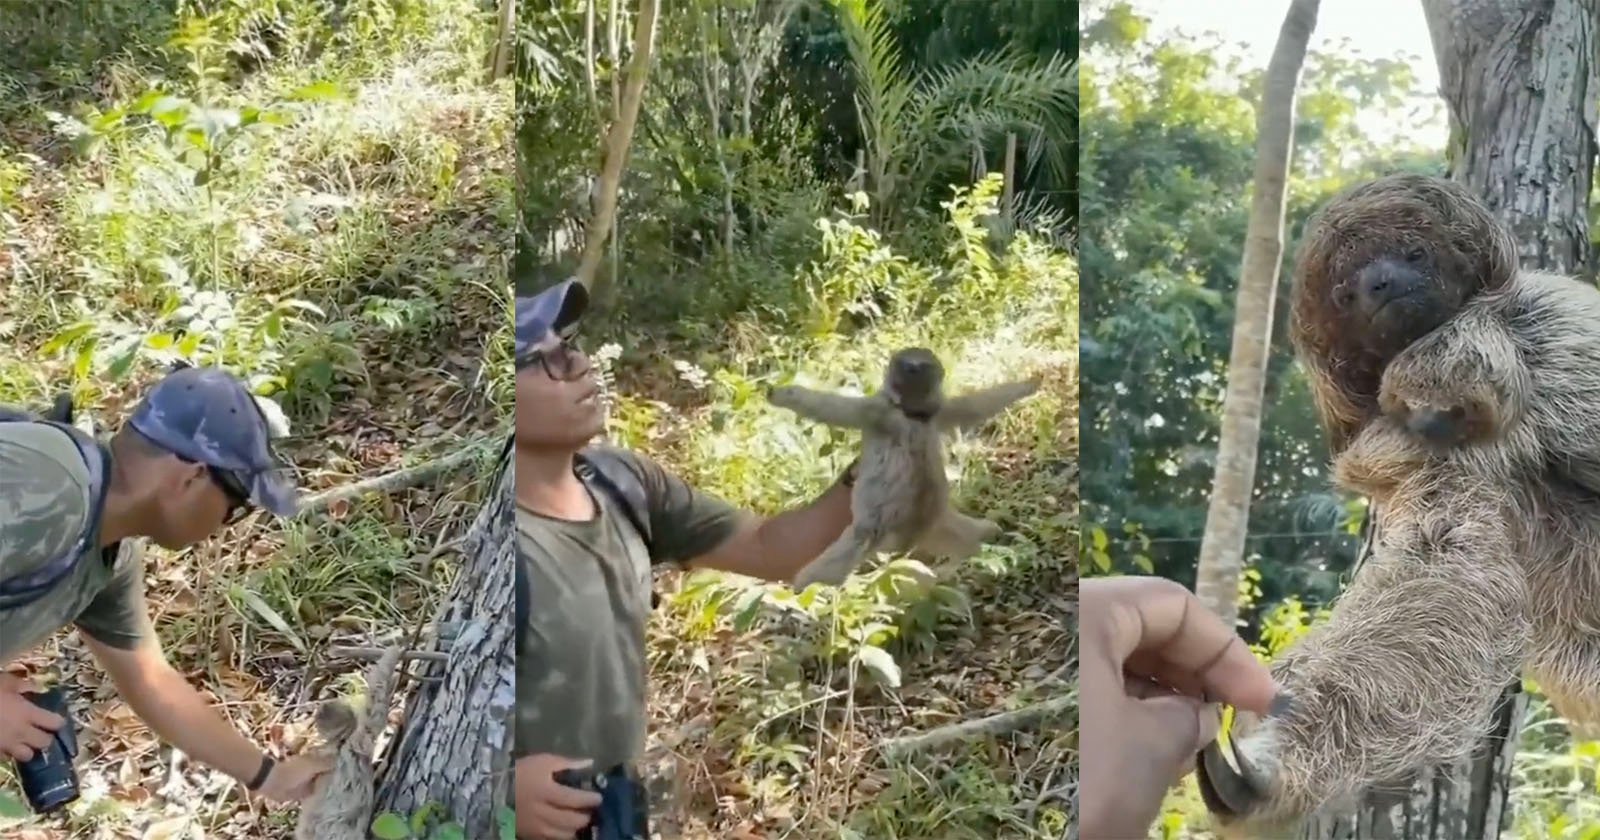 Adorable Moment Photographer Helps Baby Sloth and Mother Thanks Him